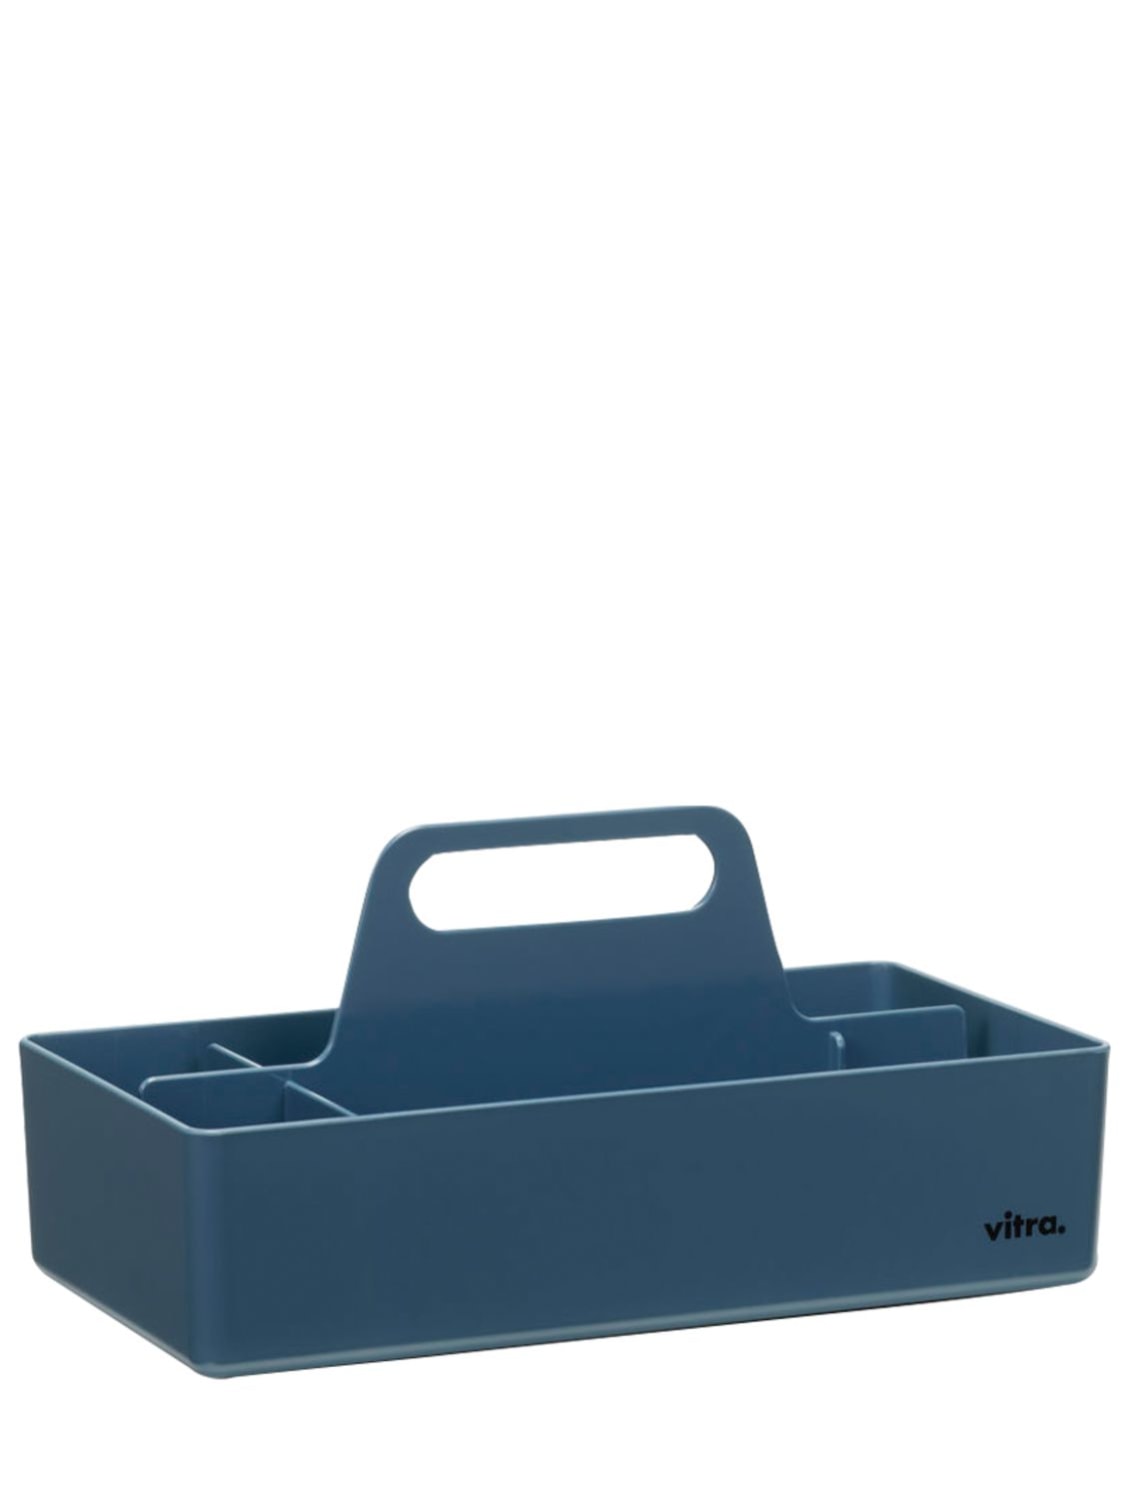 Vitra Toolbox In Blue